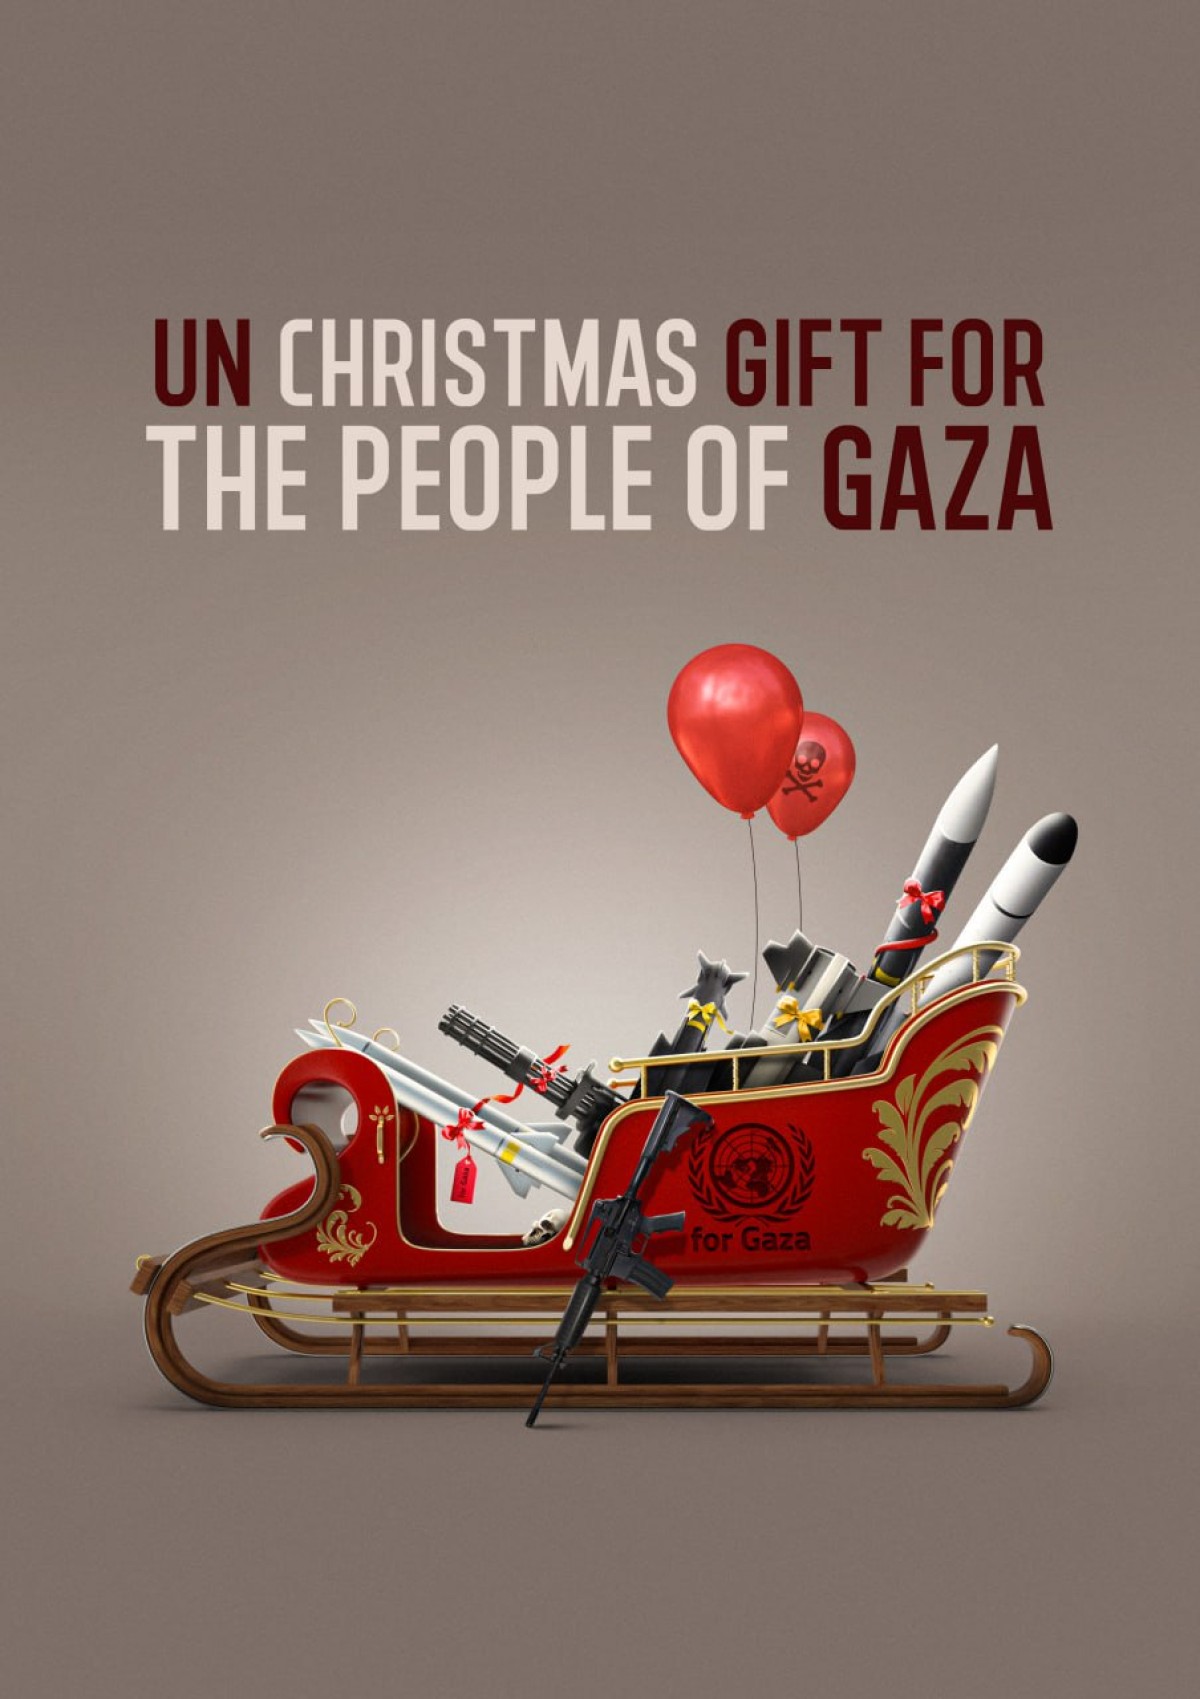 UN Christmas gift for the people of Gaza